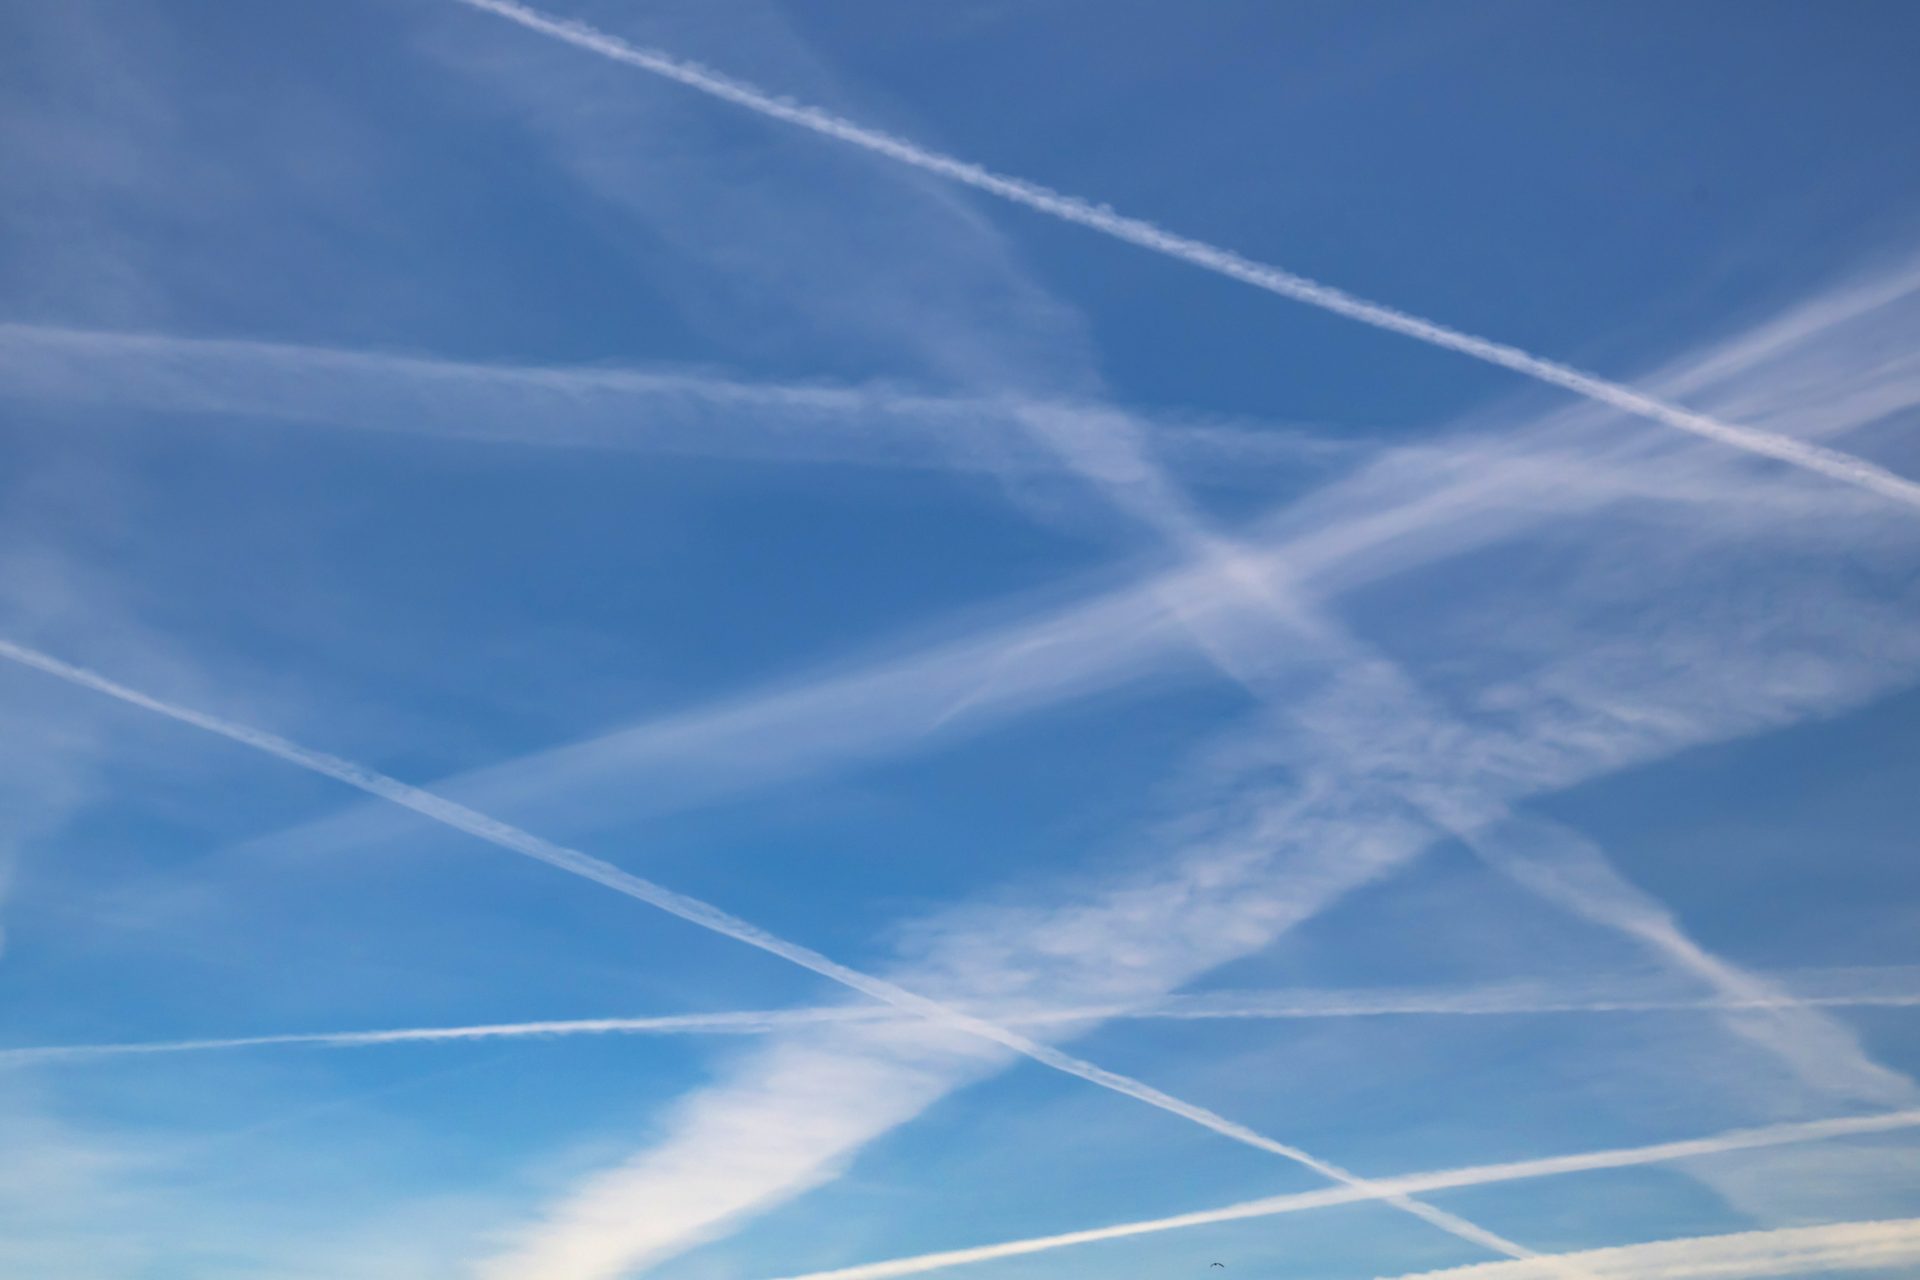 Bills attempting to ban chemtrails